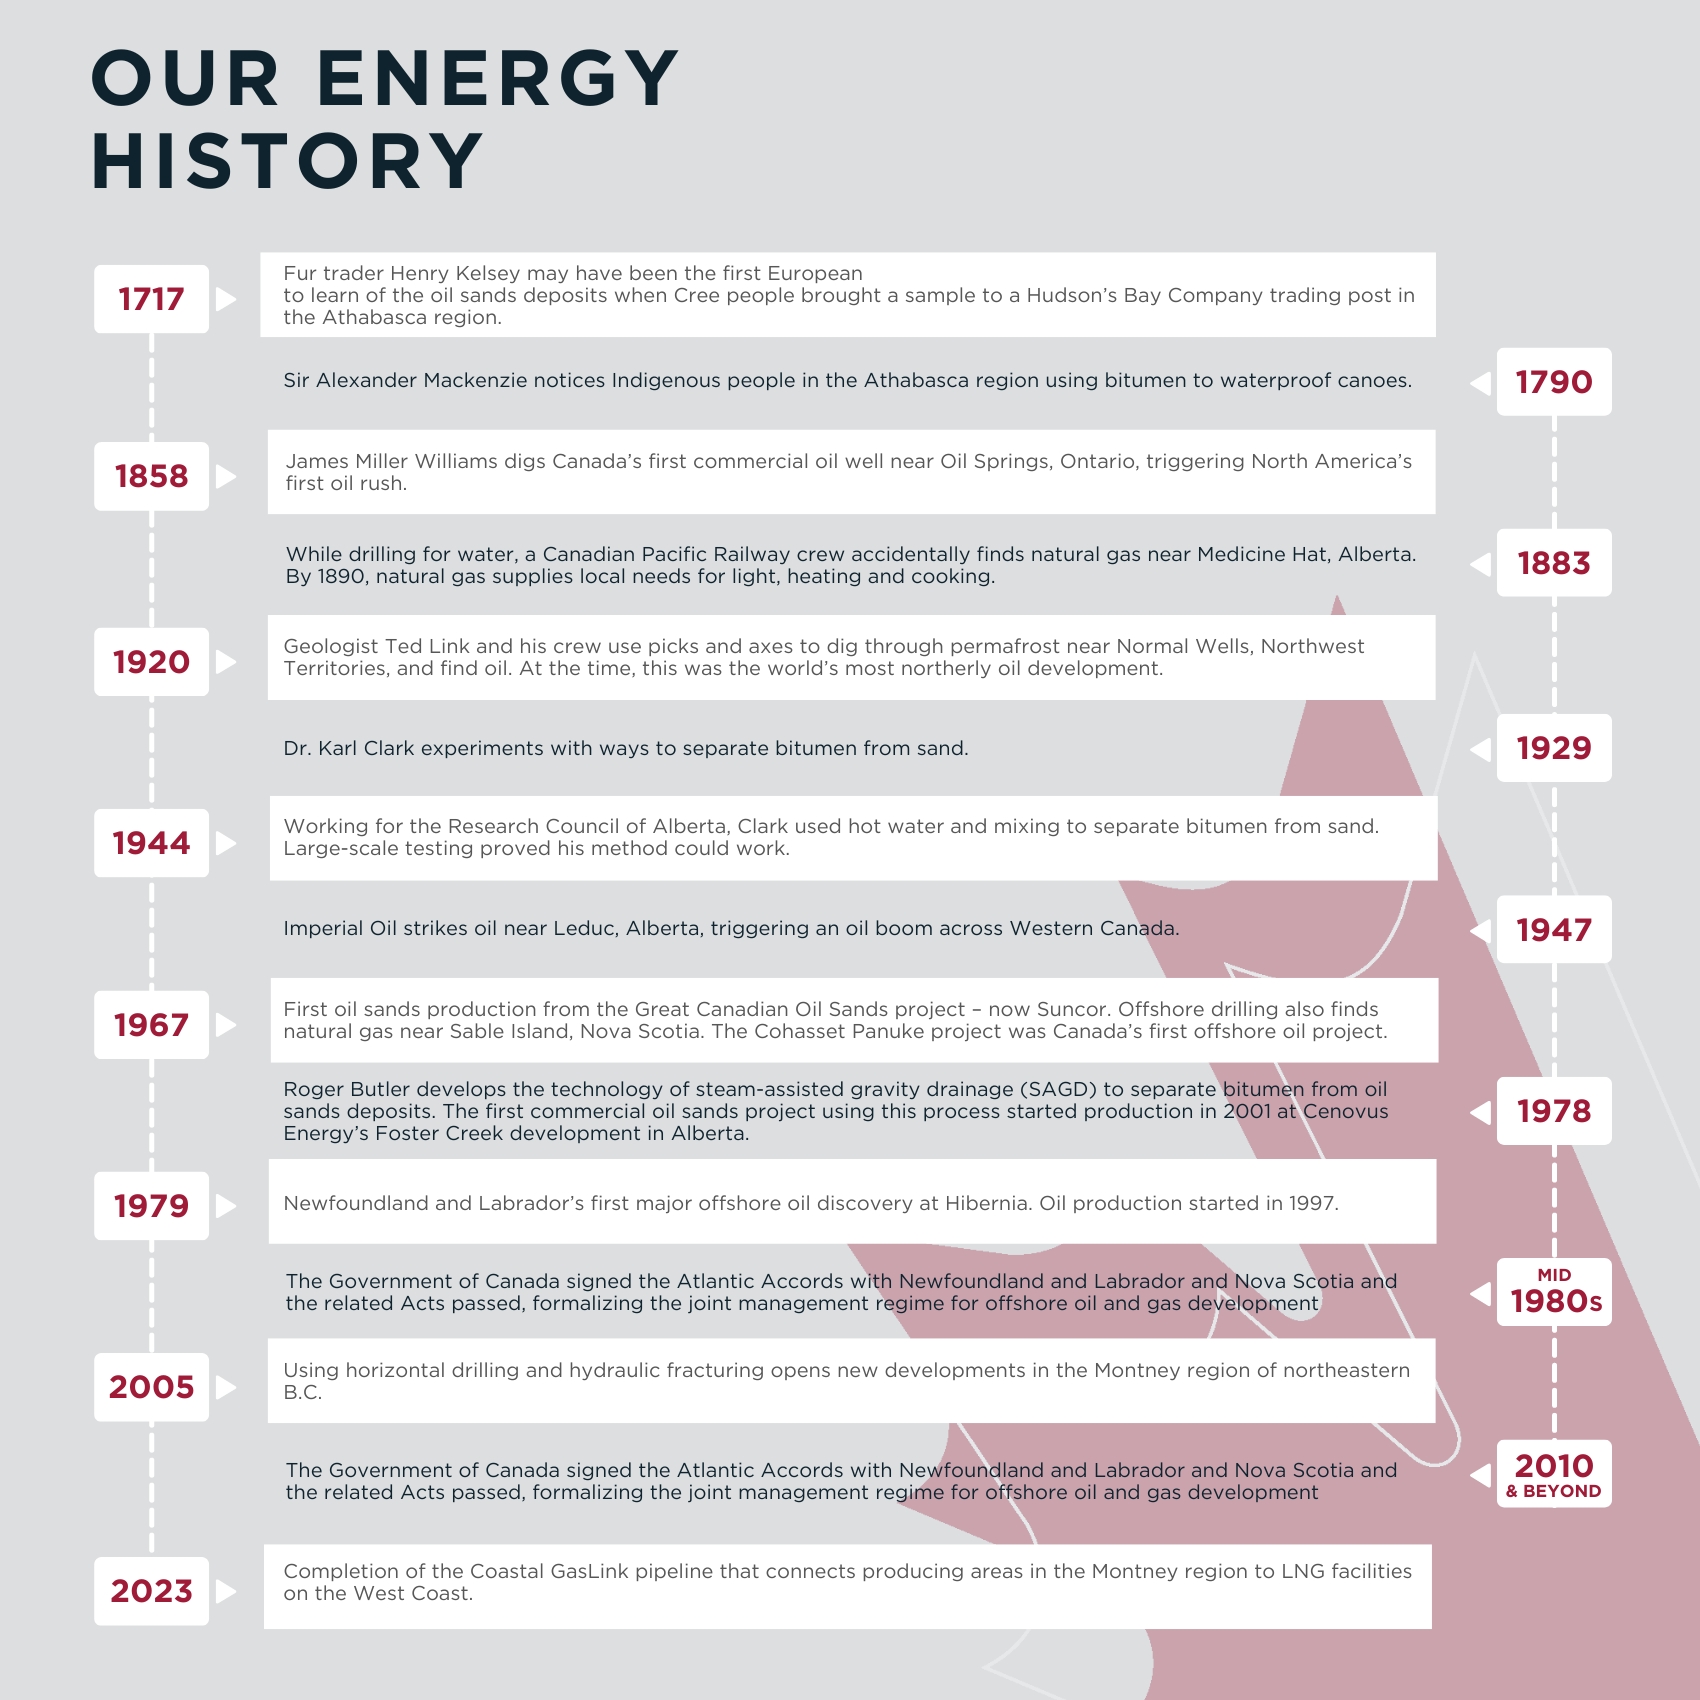 Timeline of Canada's oil and gas industry.